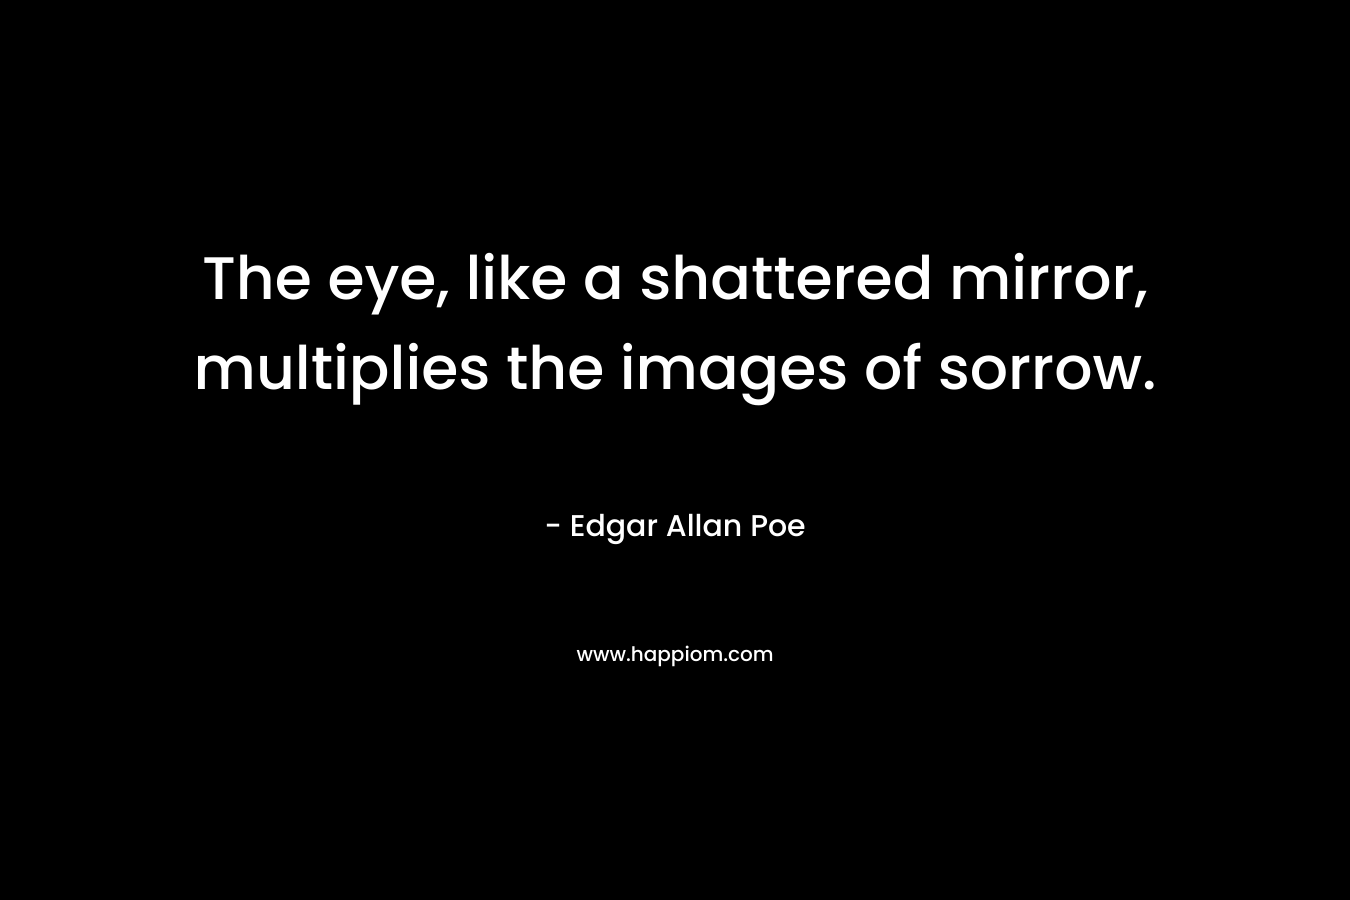 The eye, like a shattered mirror, multiplies the images of sorrow.